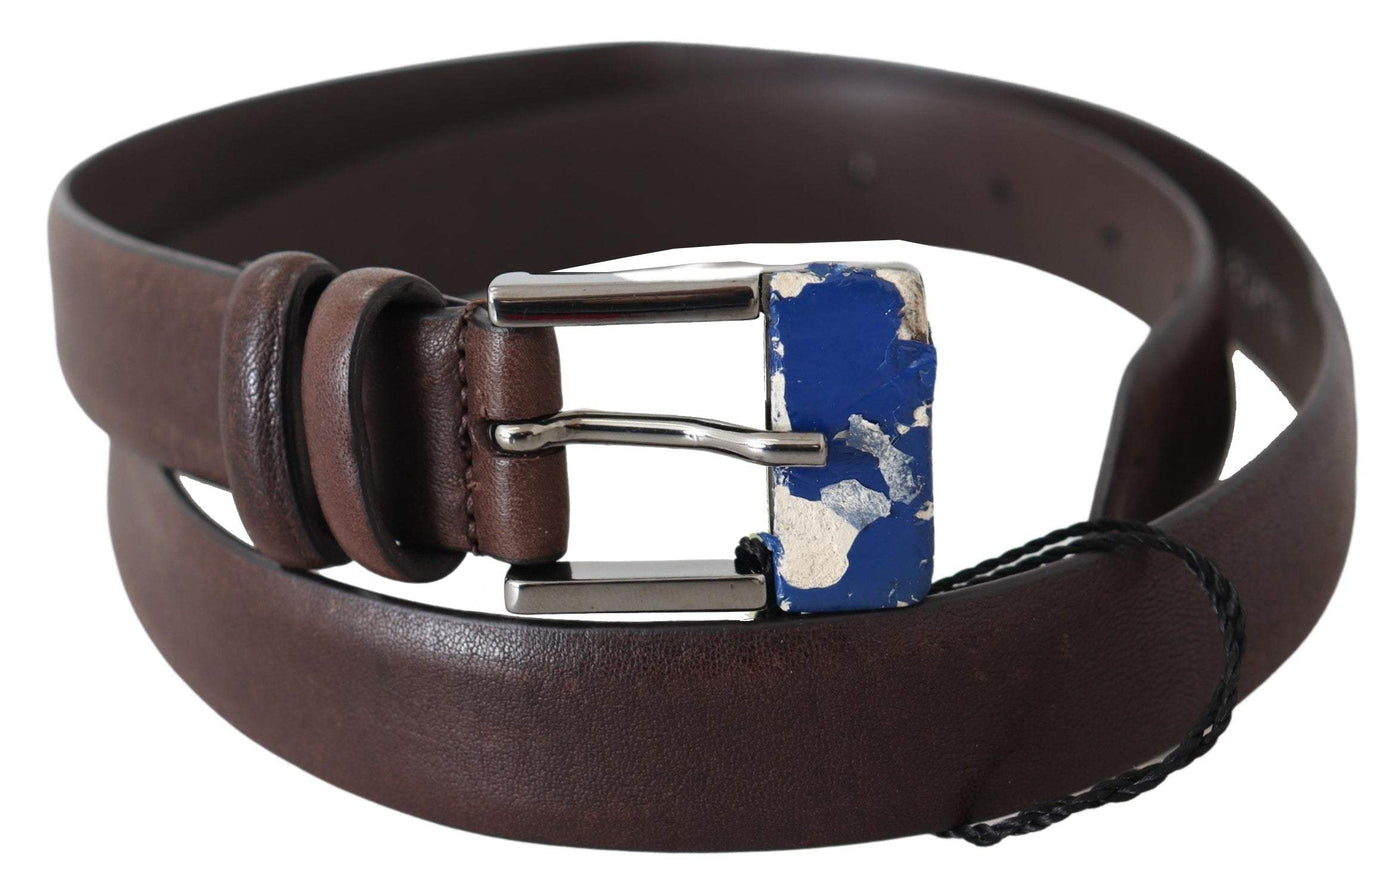 Costume National Brown Genuine Leather Silver Buckle Belt #women, 85 cm / 34 Inches, Accessories - New Arrivals, Belts - Women - Accessories, Brown, Costume National, feed-agegroup-adult, feed-color-brown, feed-gender-female at SEYMAYKA